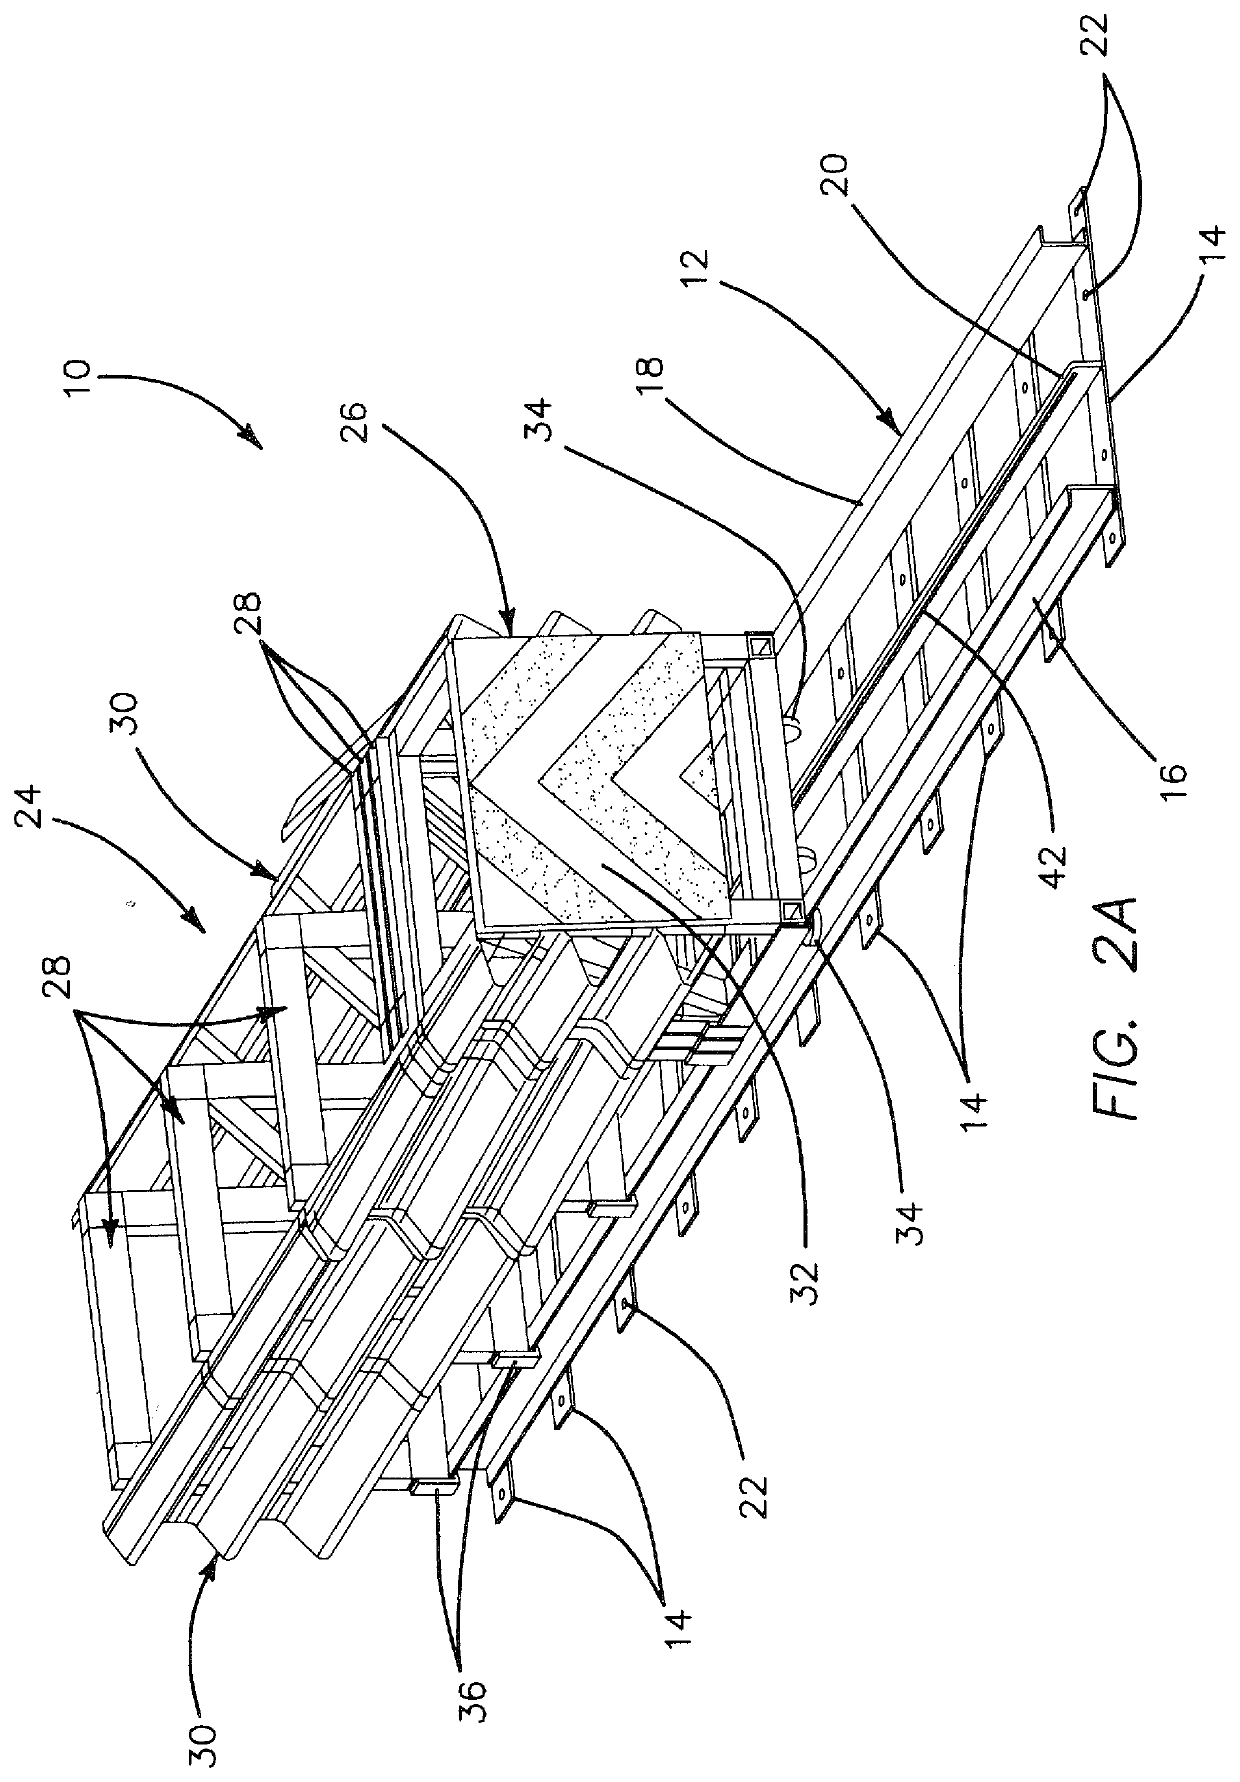 Crash impact attenuator systems and methods